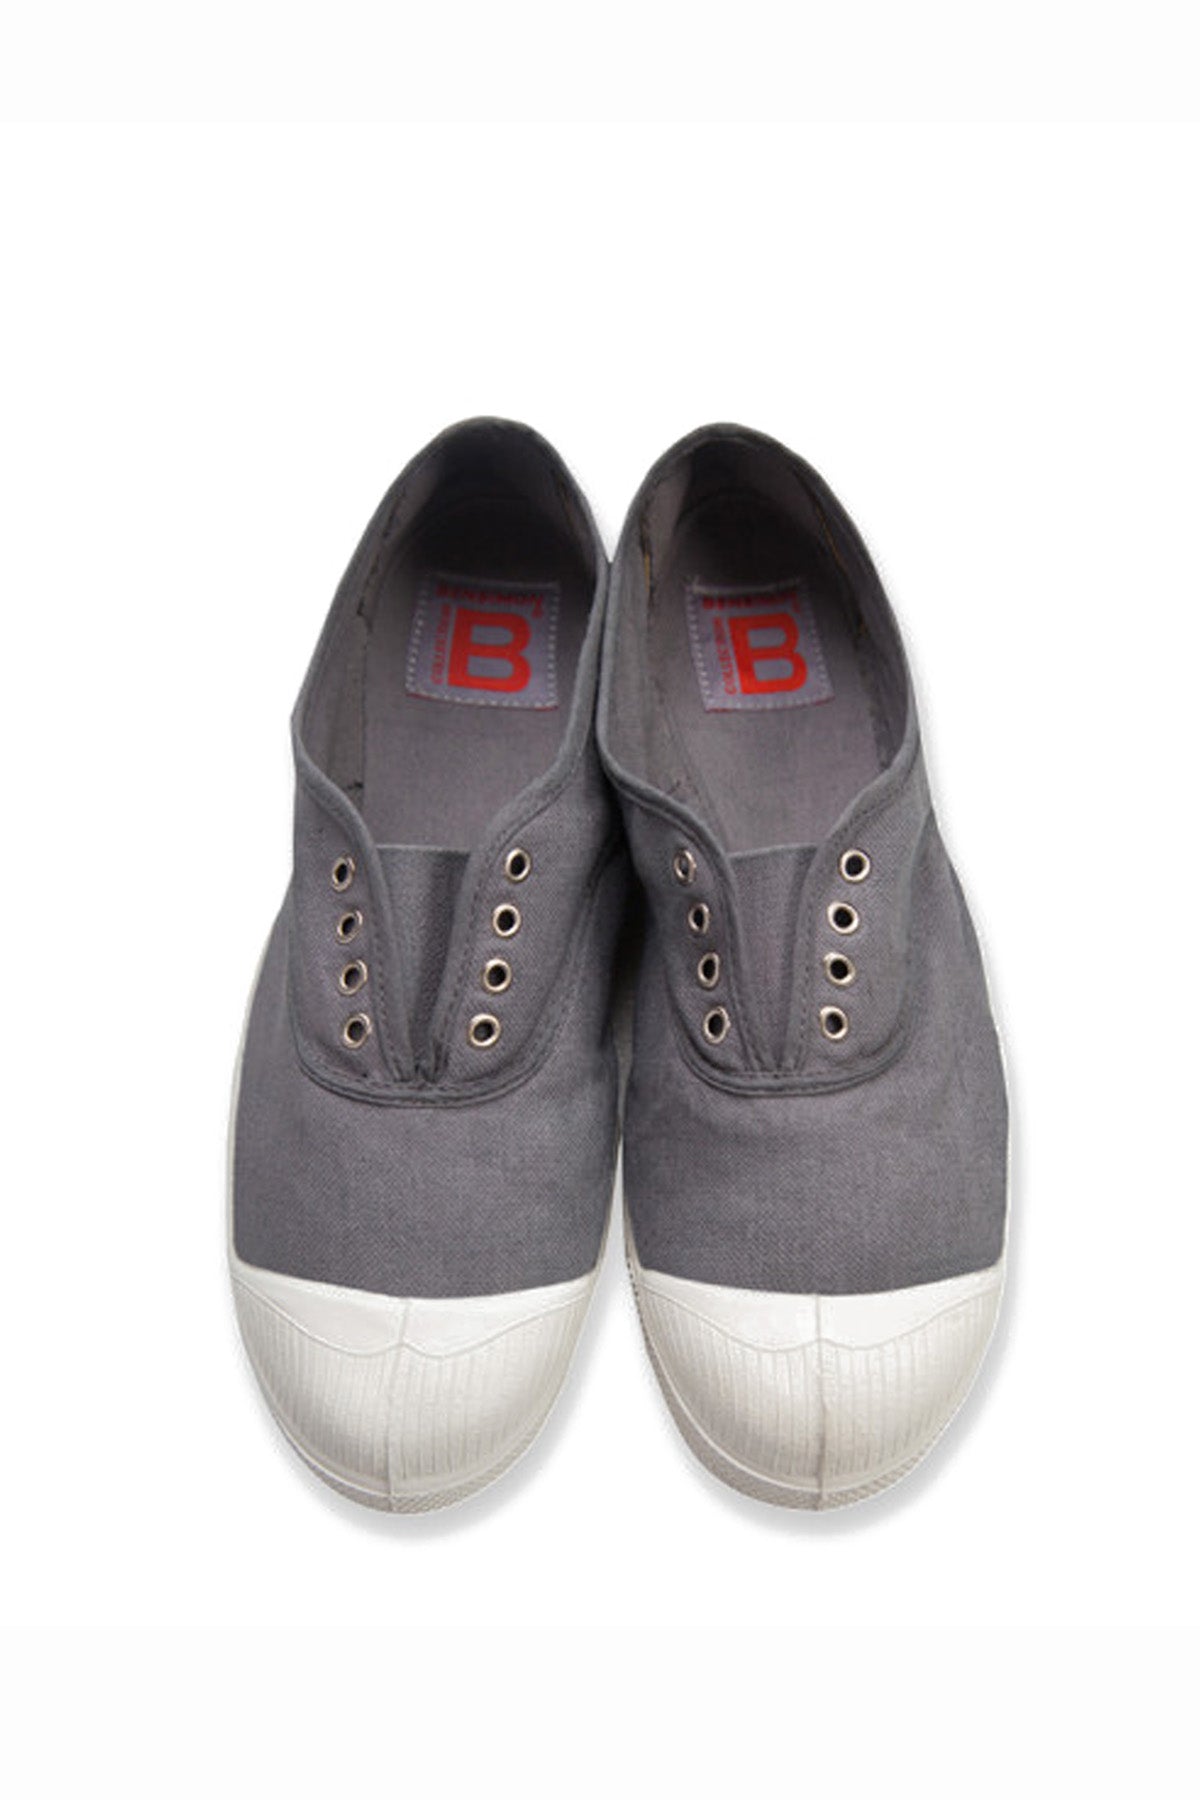 Bensimon tennis shoes of all sizes and colors for women online